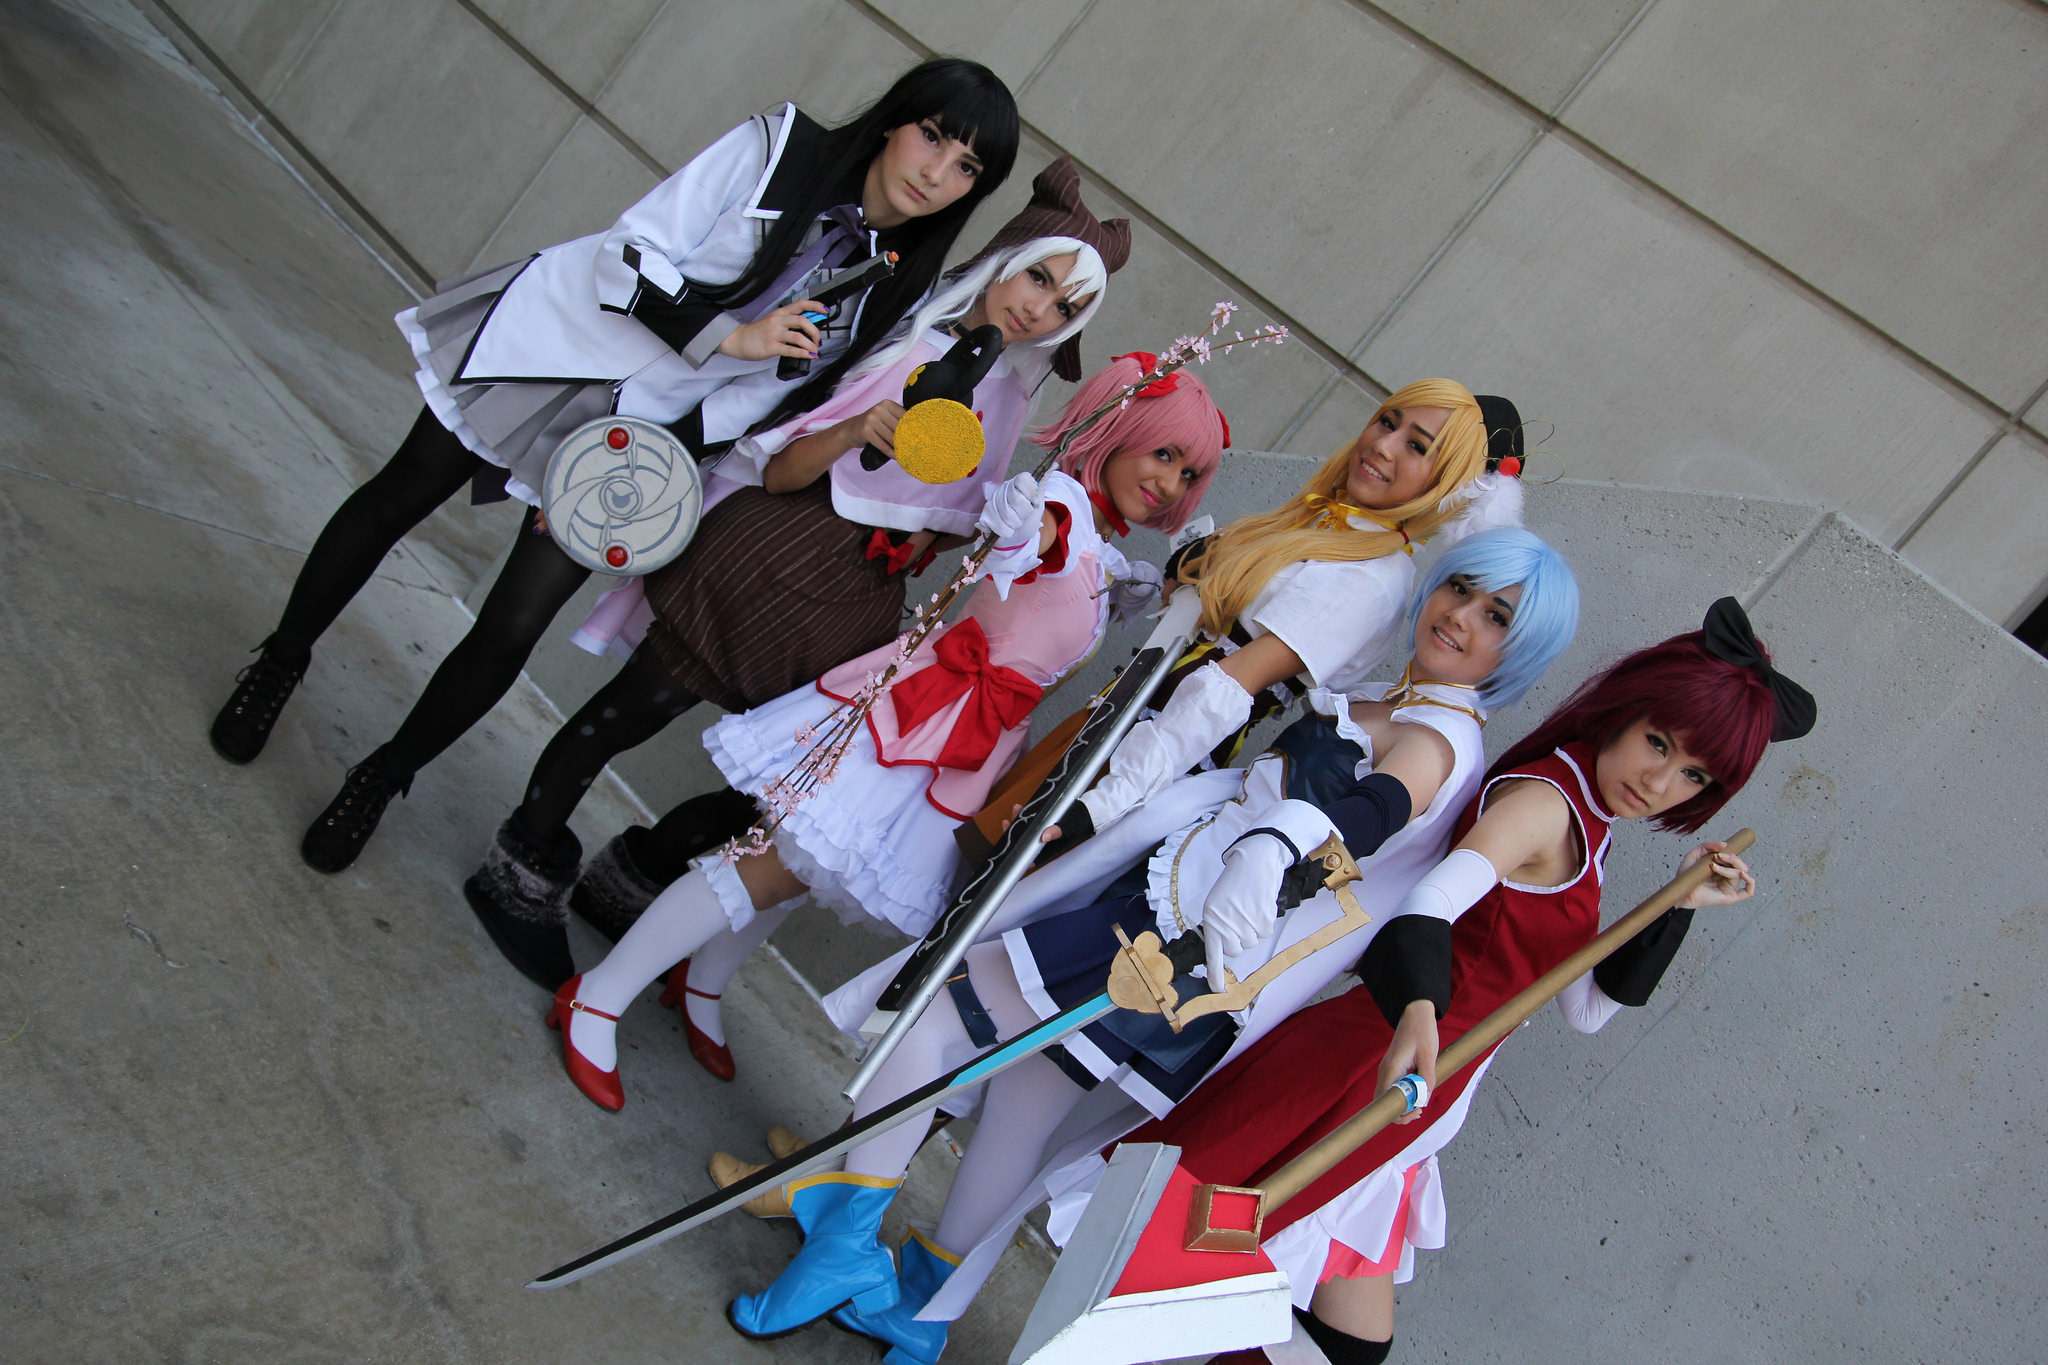 ax20164 Anime Expo 2016 in Los Angeles Convention Center